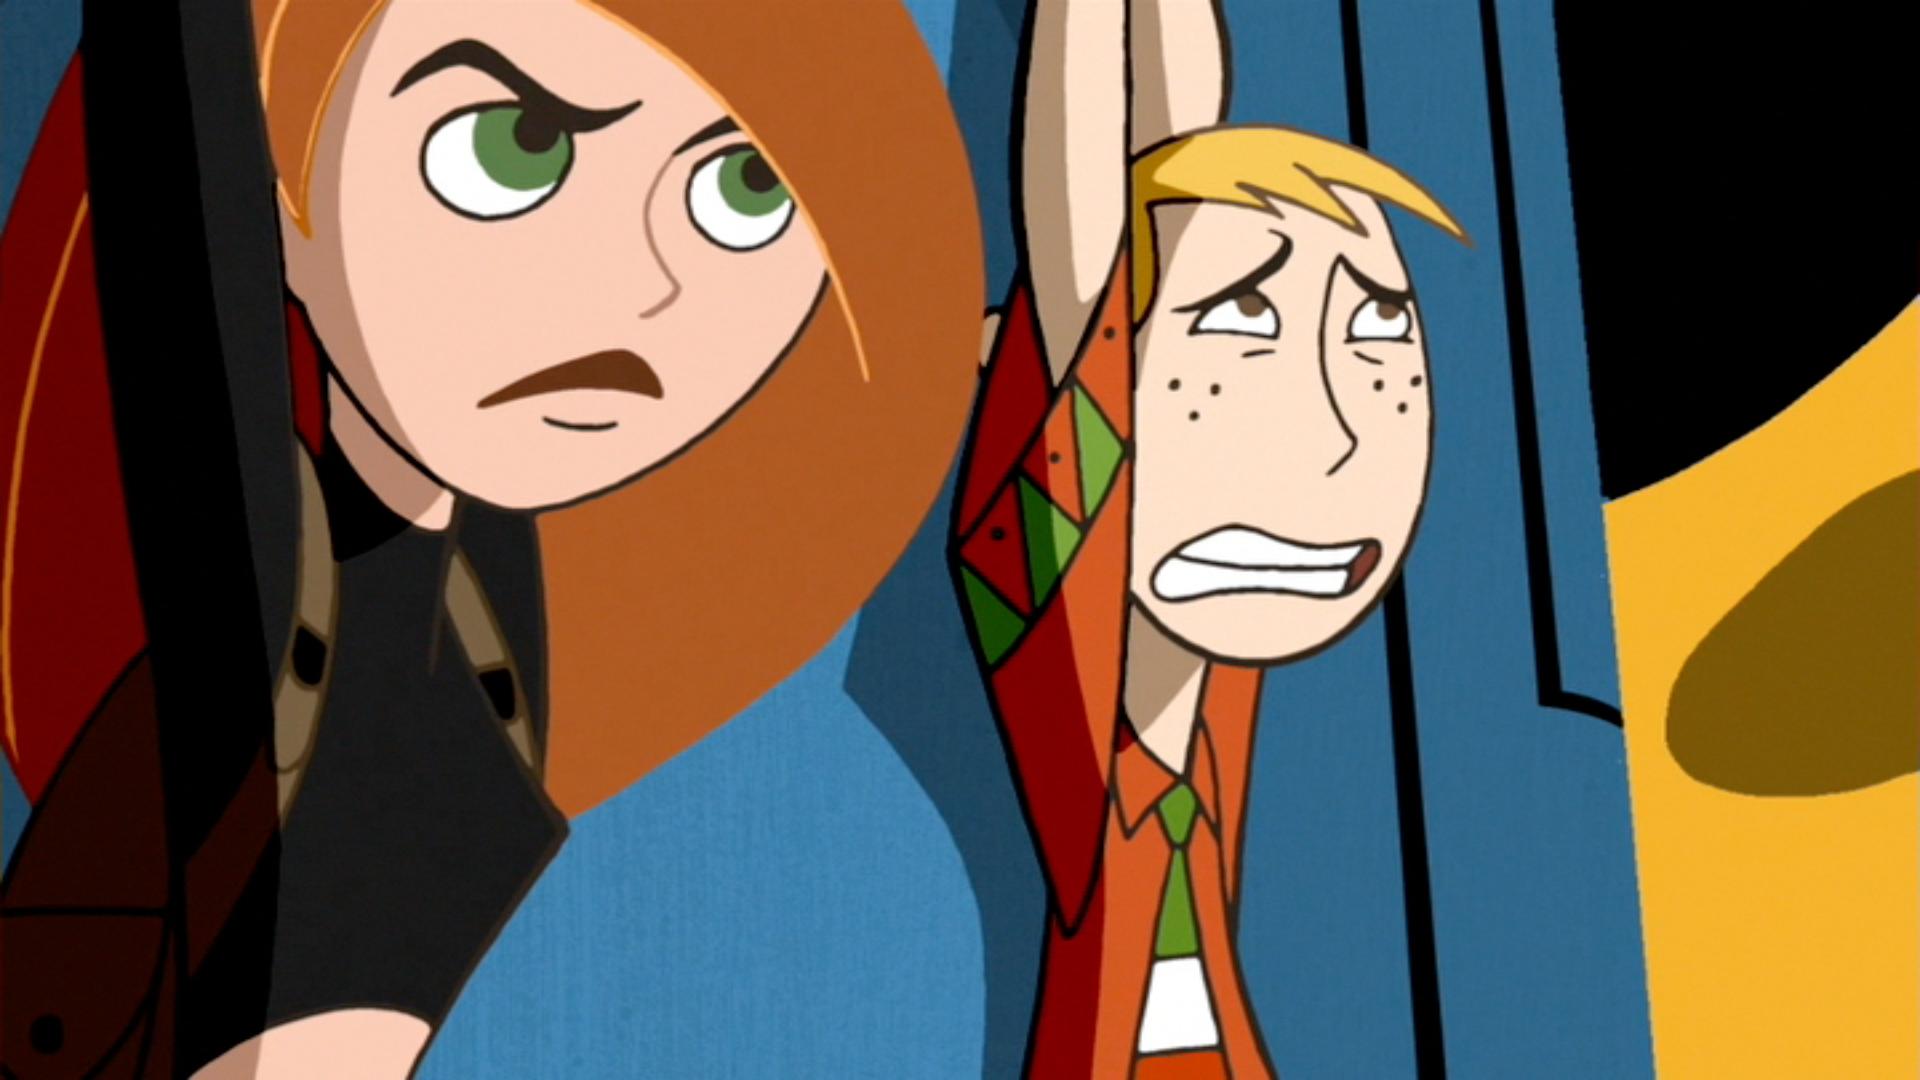 Kim possible tied up - Best adult videos and photos